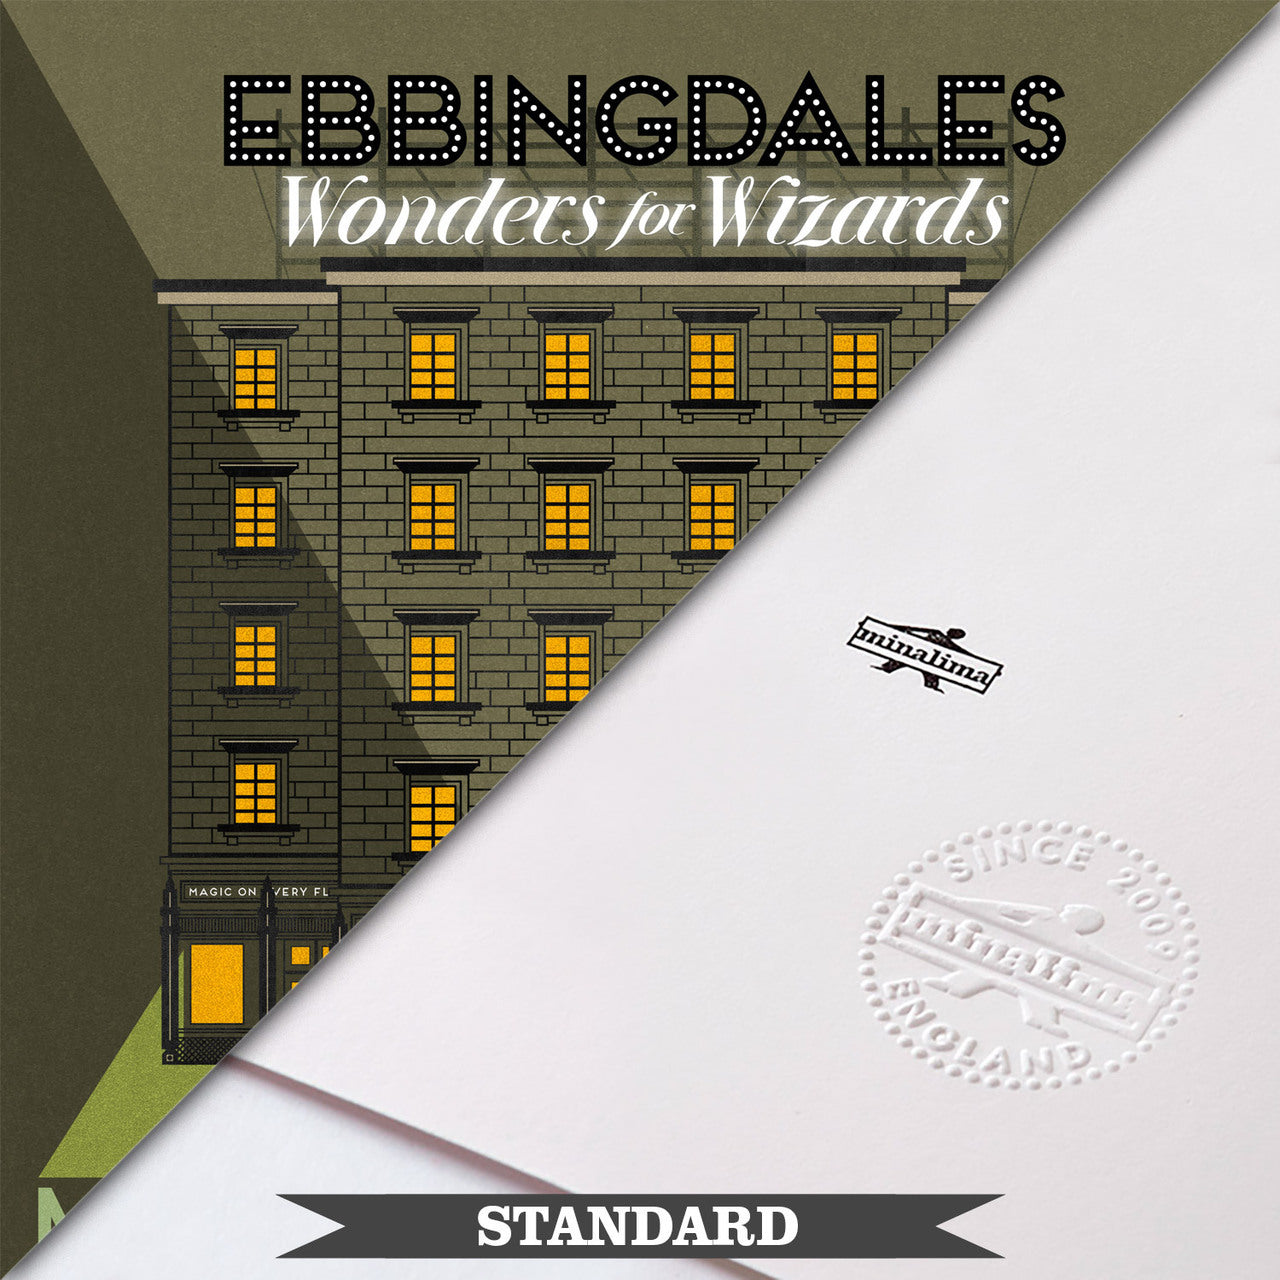 Ebbingdales Wonders for Wizards Limited Edition Art Print